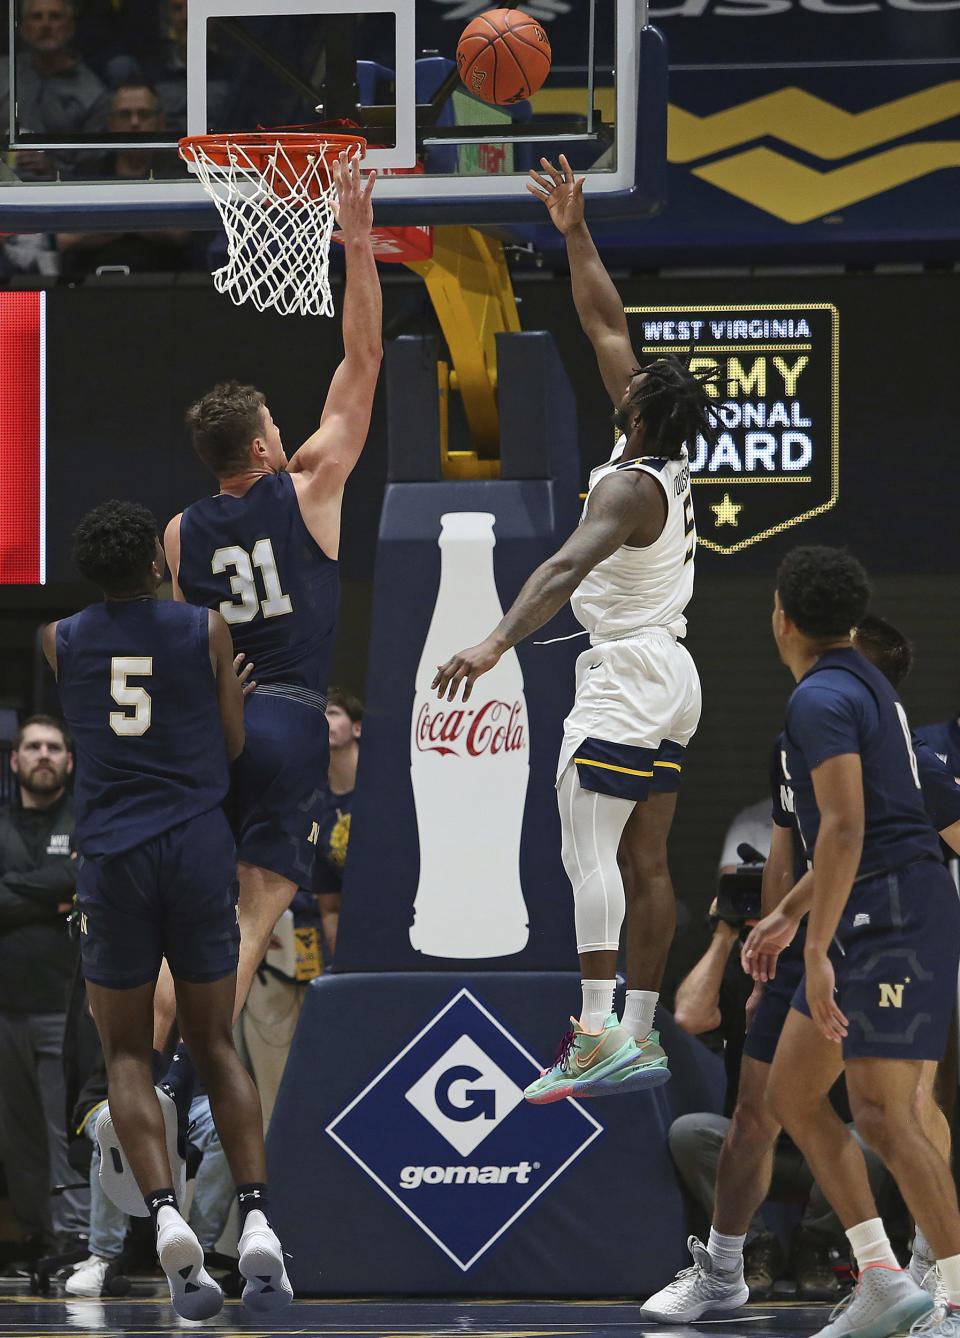 West Virginia guard Joe Toussaint (5) shoots while defended by Navy forward Daniel Deaver (31) during the first half of an NCAA college basketball game in Morgantown, W.Va., Wednesday, Dec. 7, 2022. (AP Photo/Kathleen Batten)